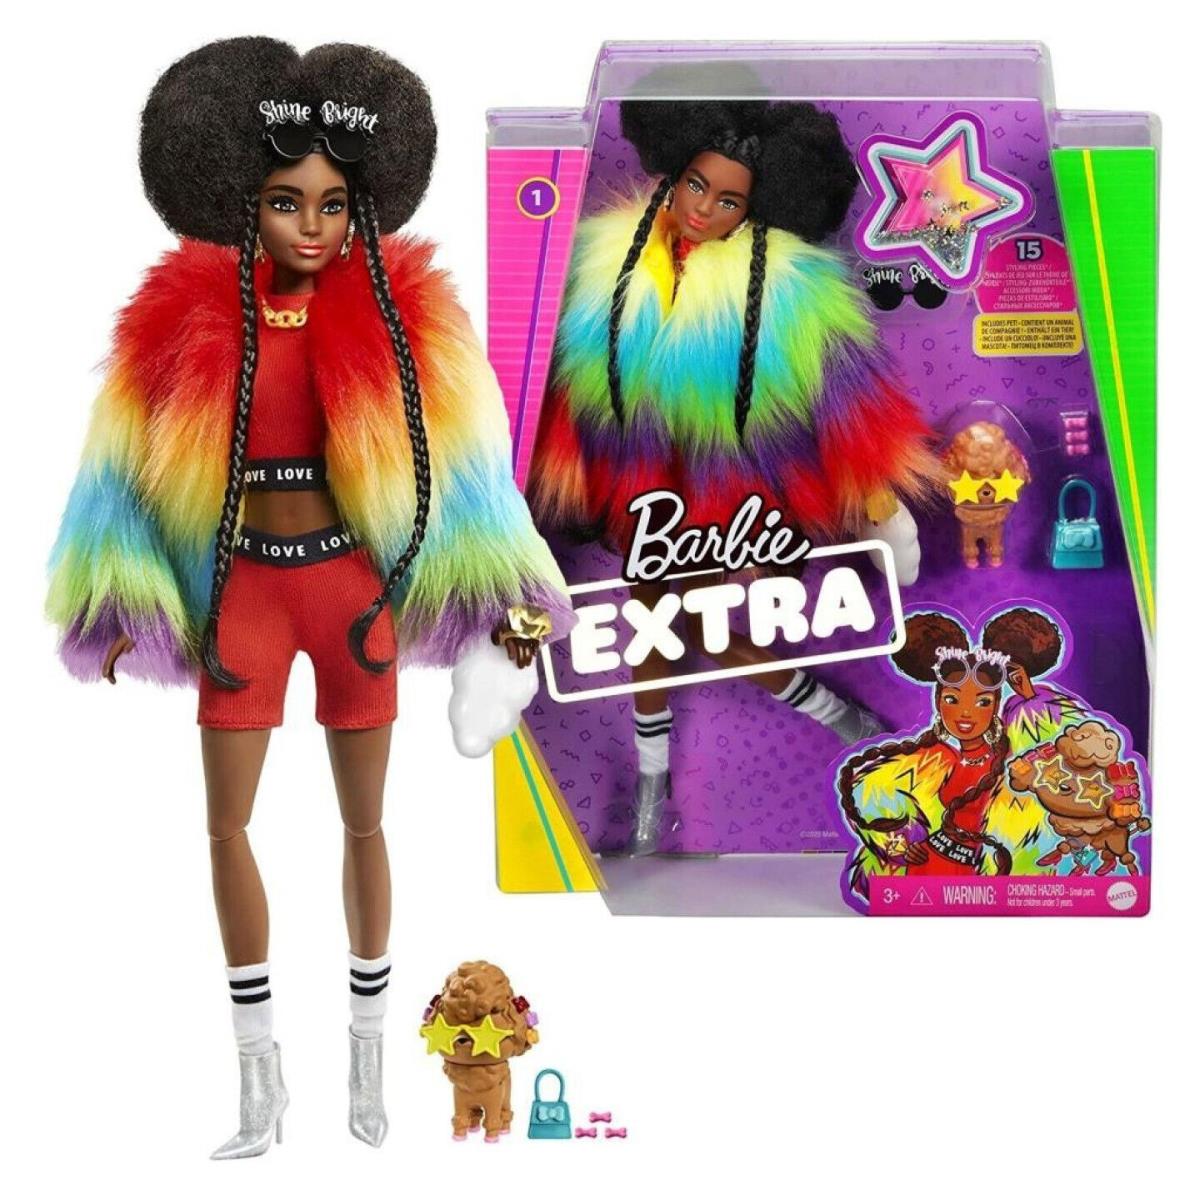 Barbie Extra Doll 1 in Furry Rainbow Coat with Pet Poodle Mattel Gift Set GVR04